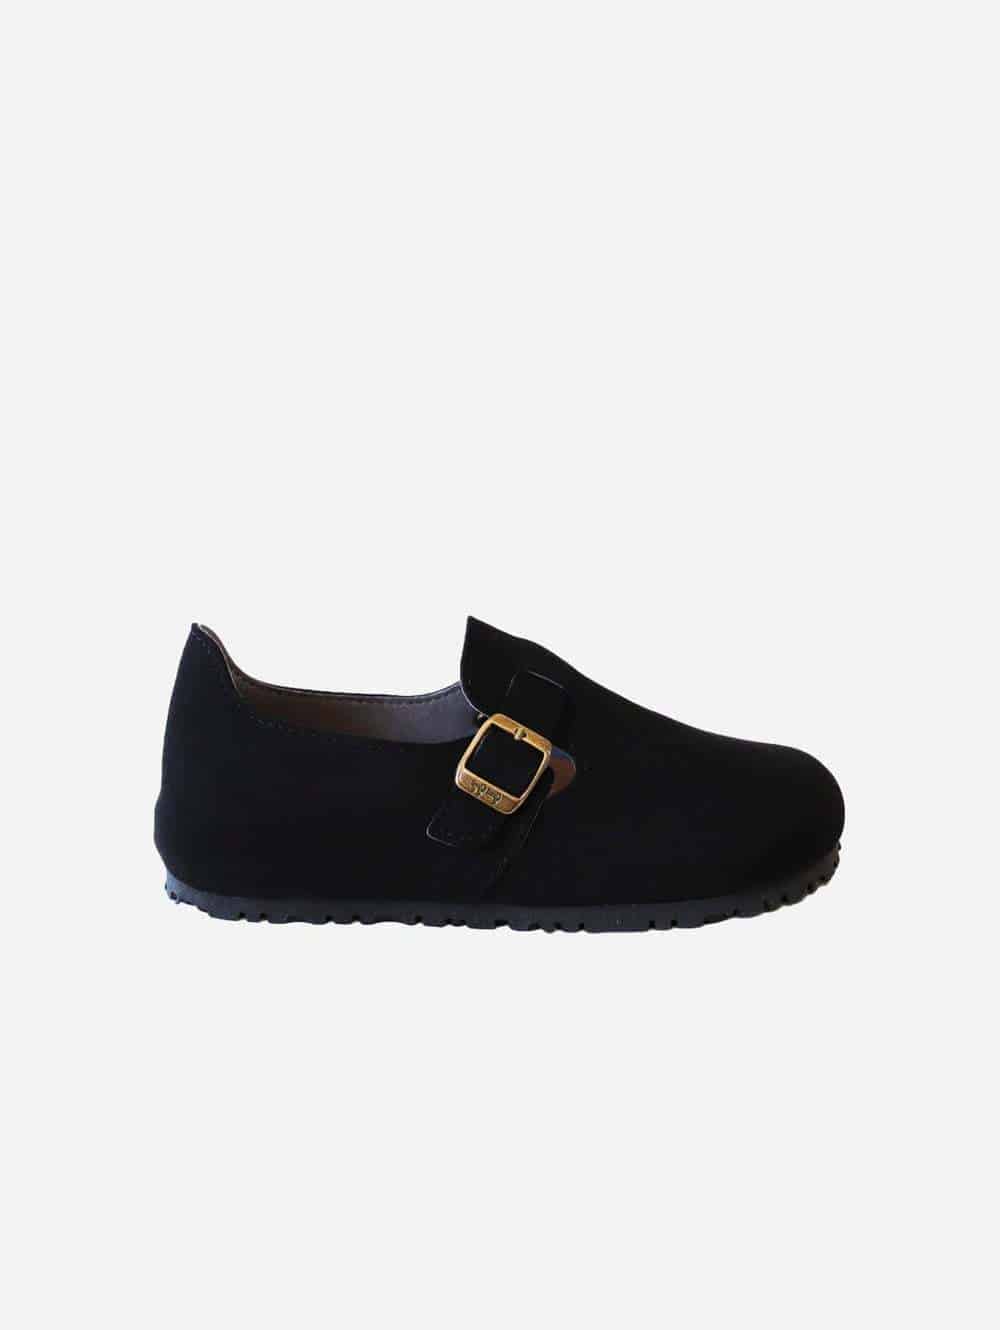 vegan closed toe comfy clogs in vegan black leather with buckle and gold toned hardware